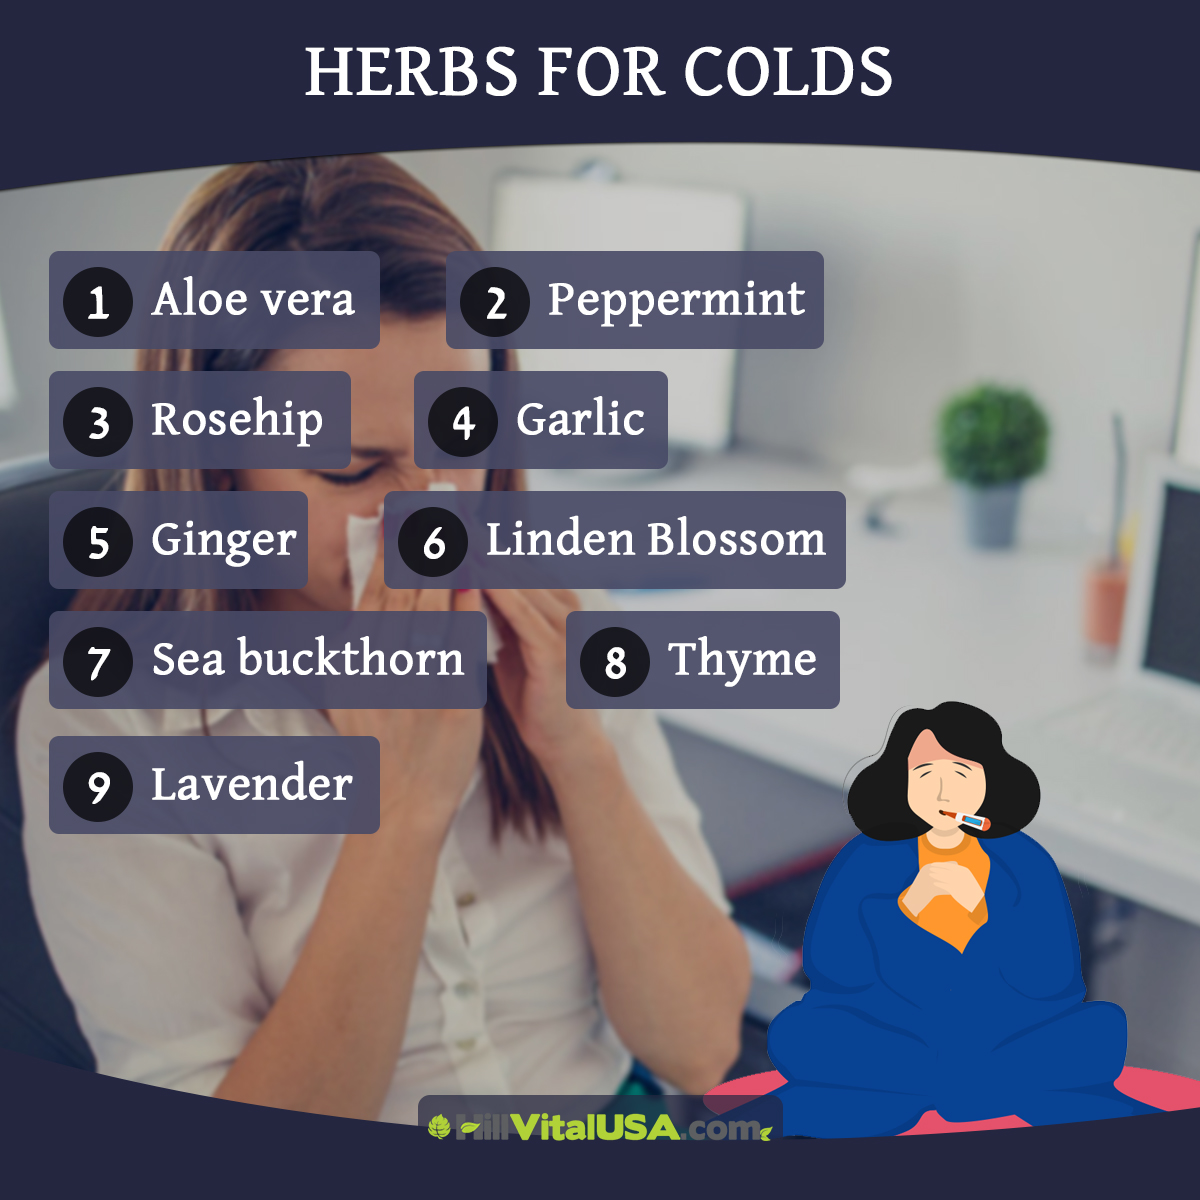 Herbs for colds